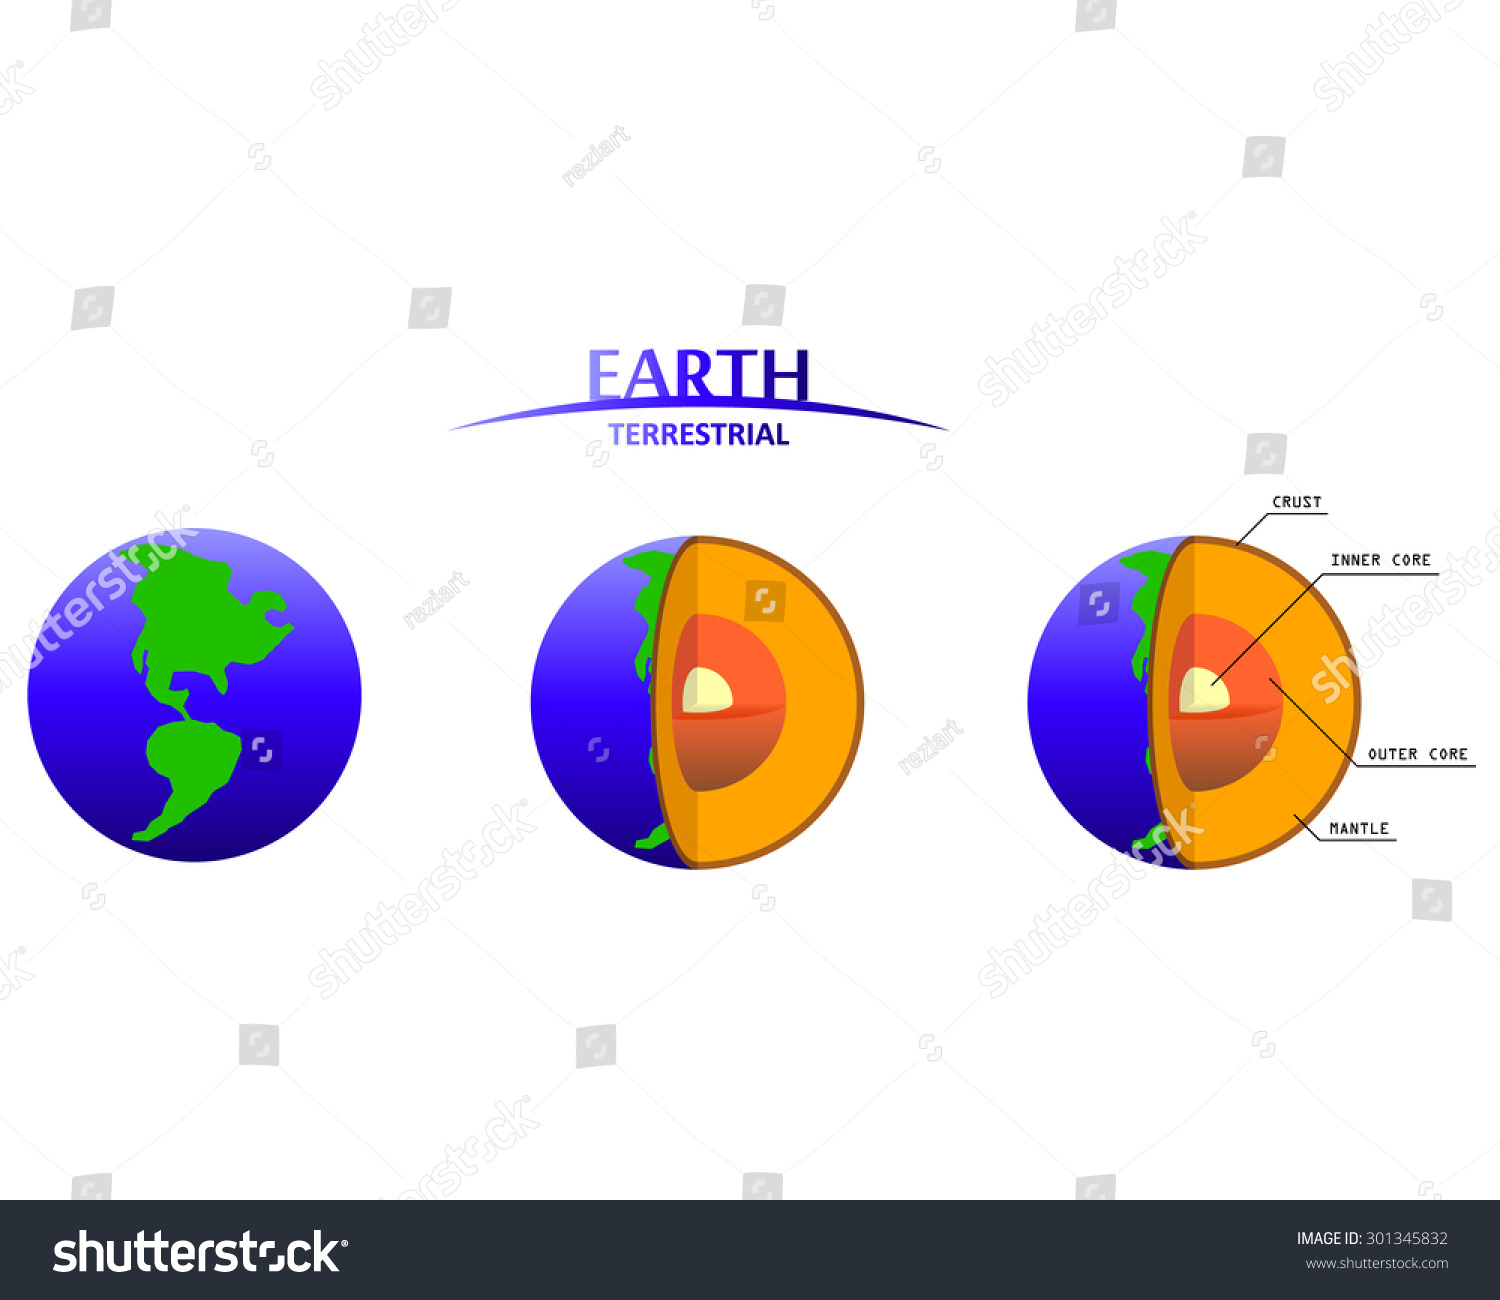 earth layers clipart - photo #34